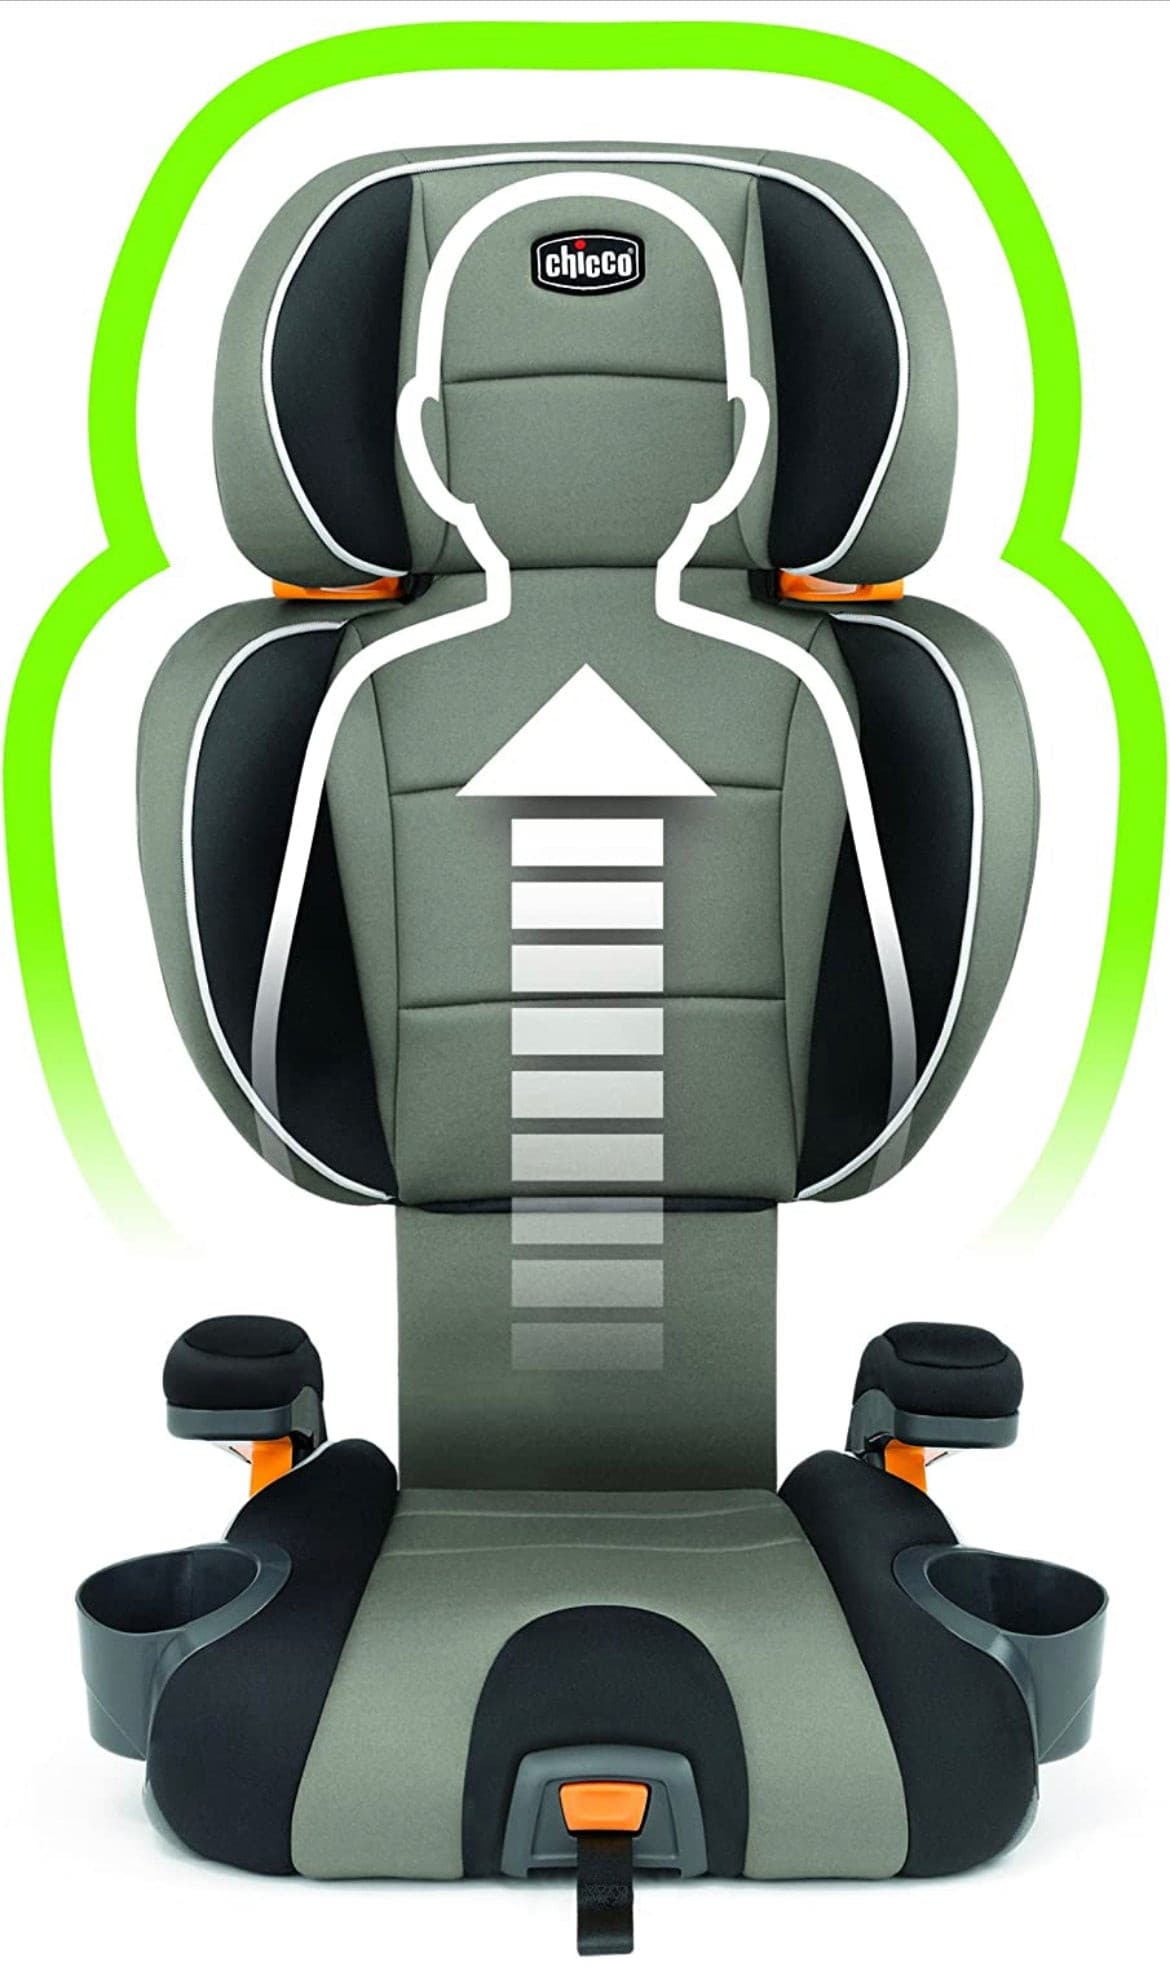 KidFit 2-in-1 Belt Positioning Booster Car Seat By Chicco.